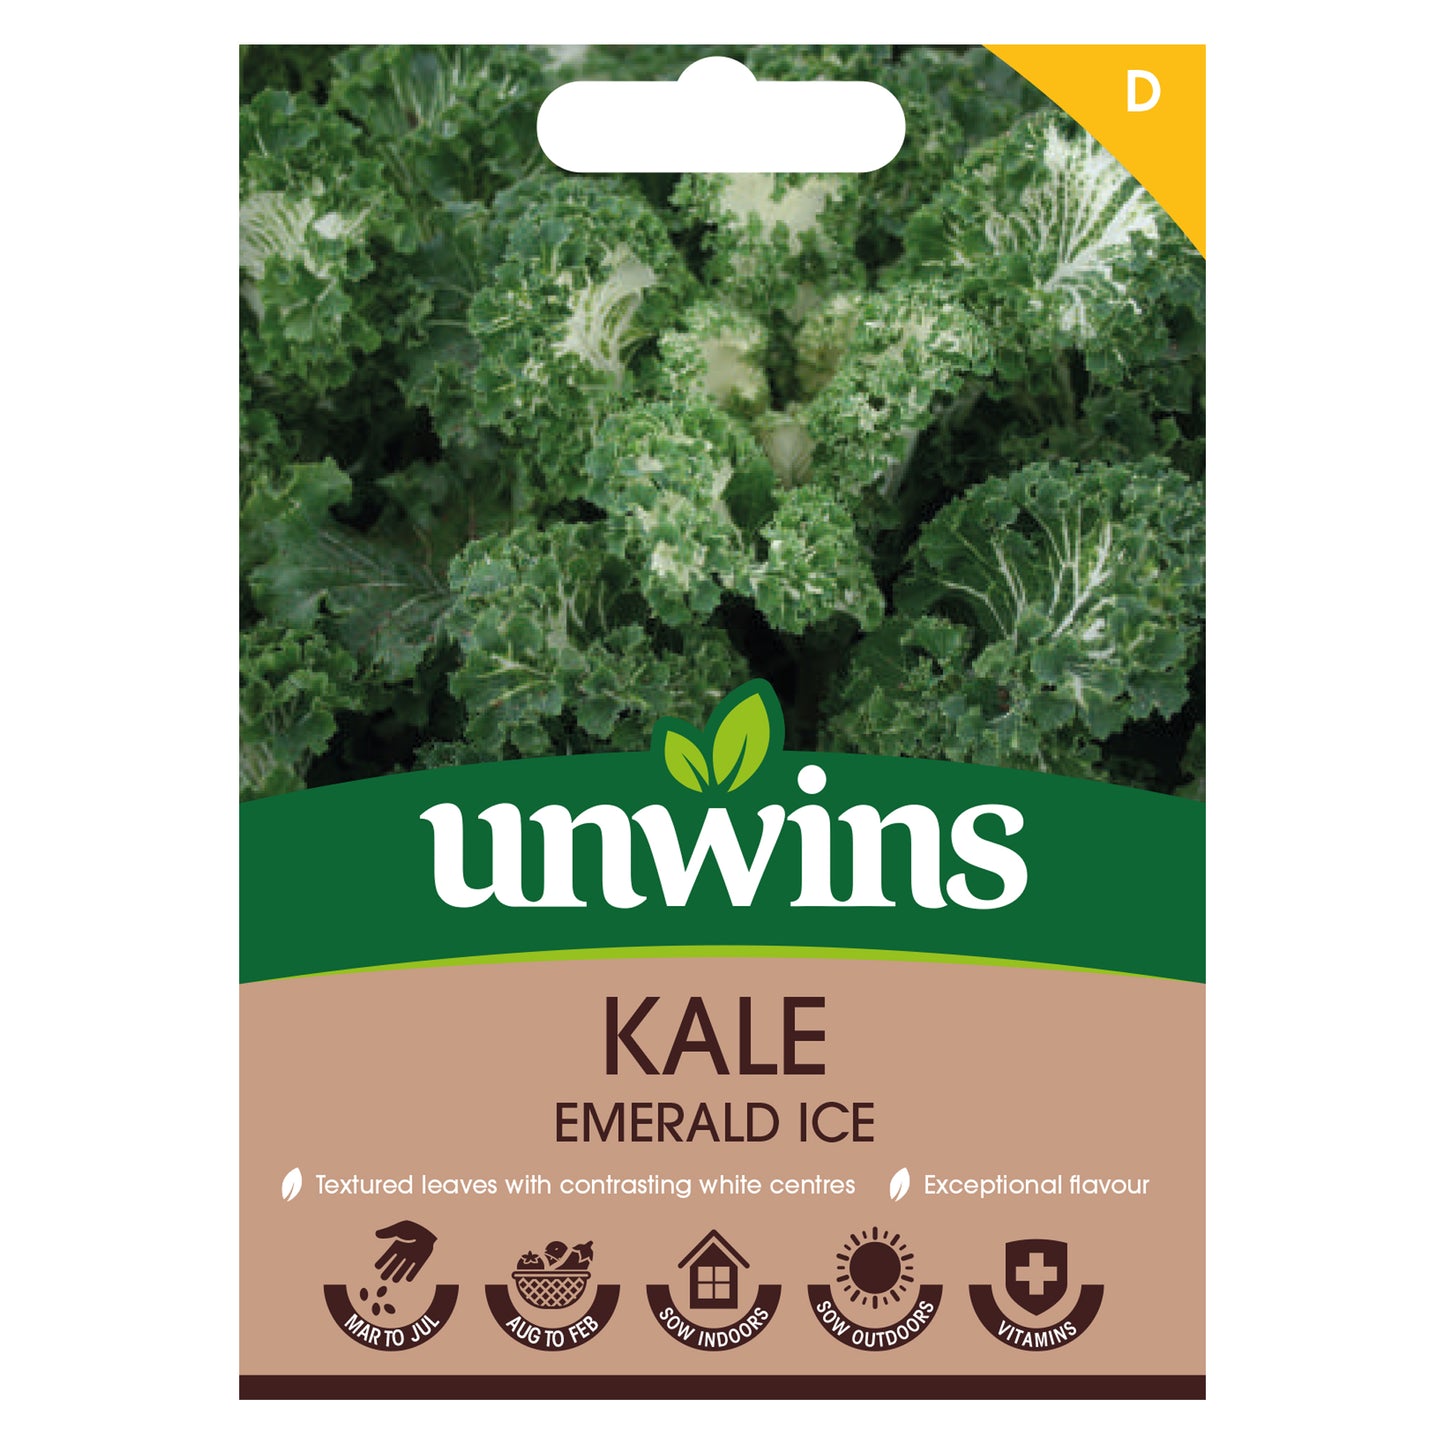 Unwins Kale Emerald Ice Seeds front of pack